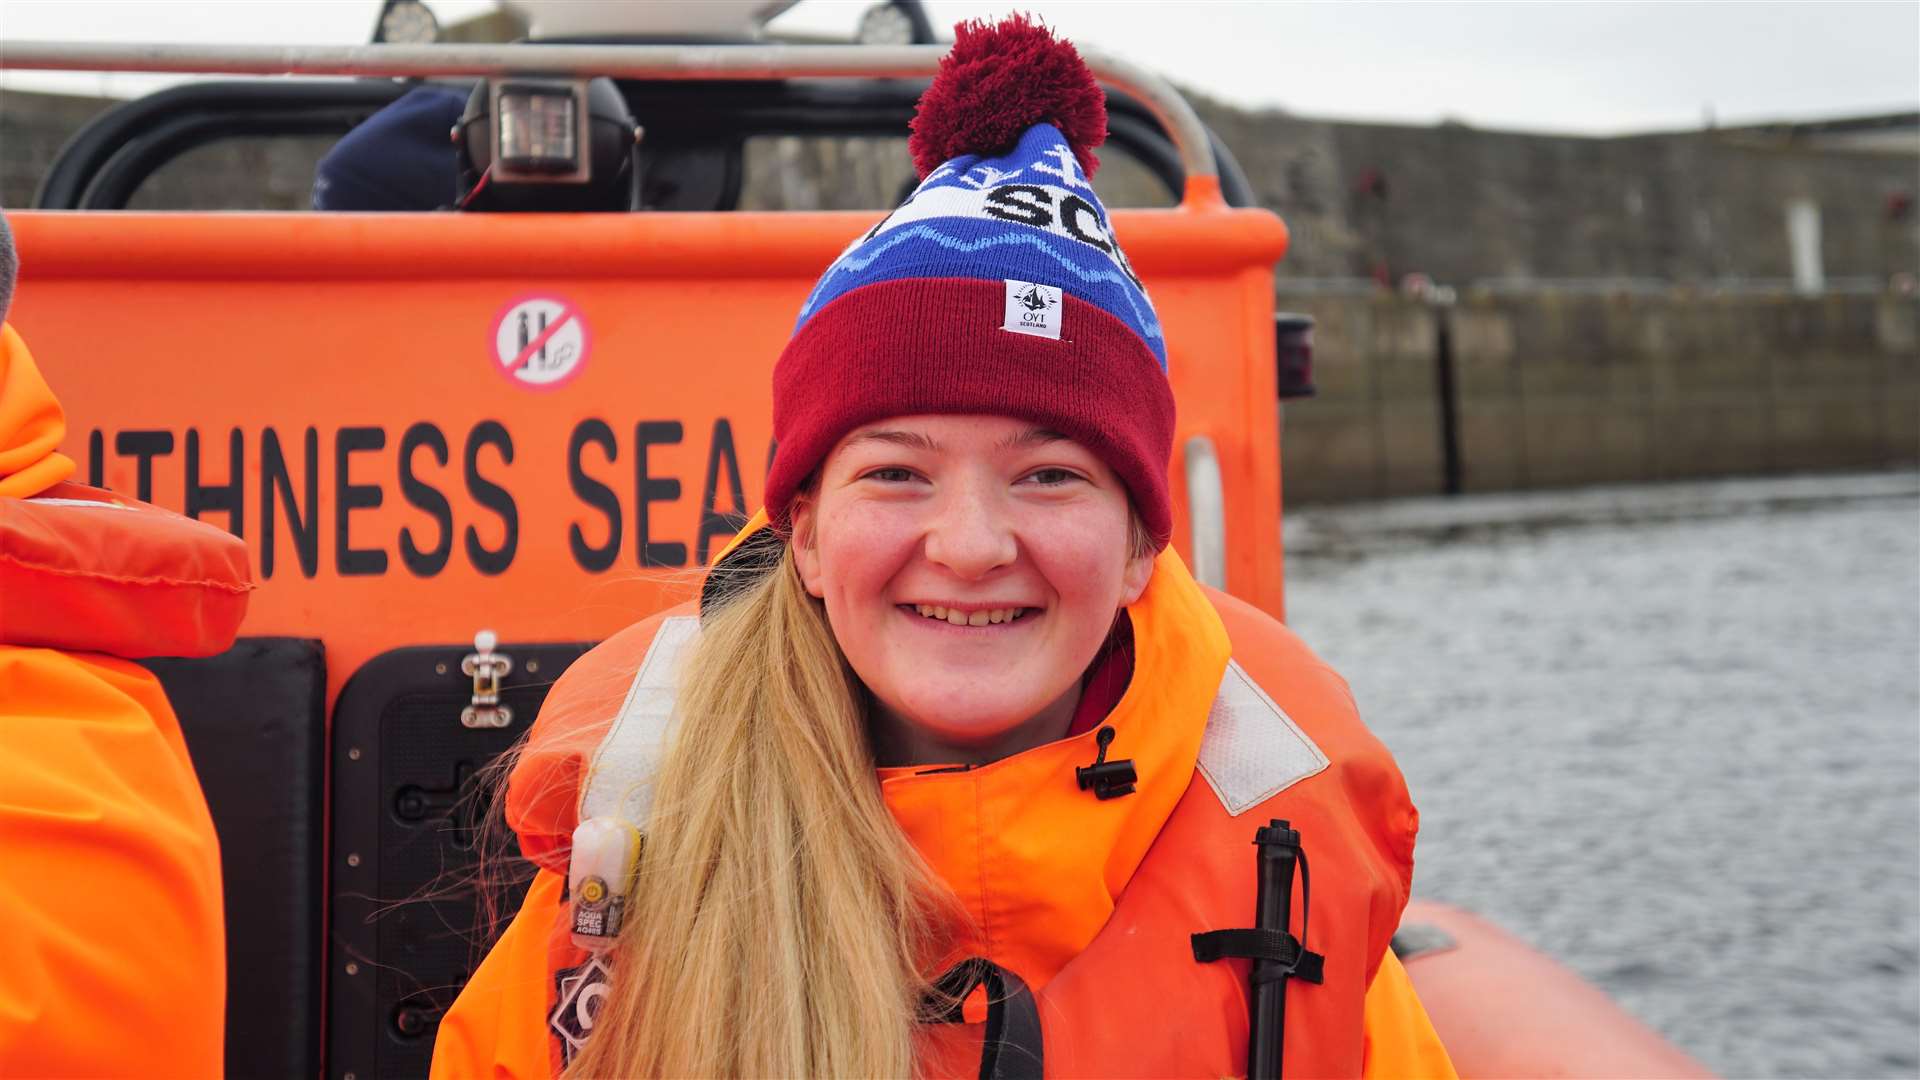 Megan Sutherland joined the Geo Explorer team and said she wanted to find out more about sailing. Picture: DGS